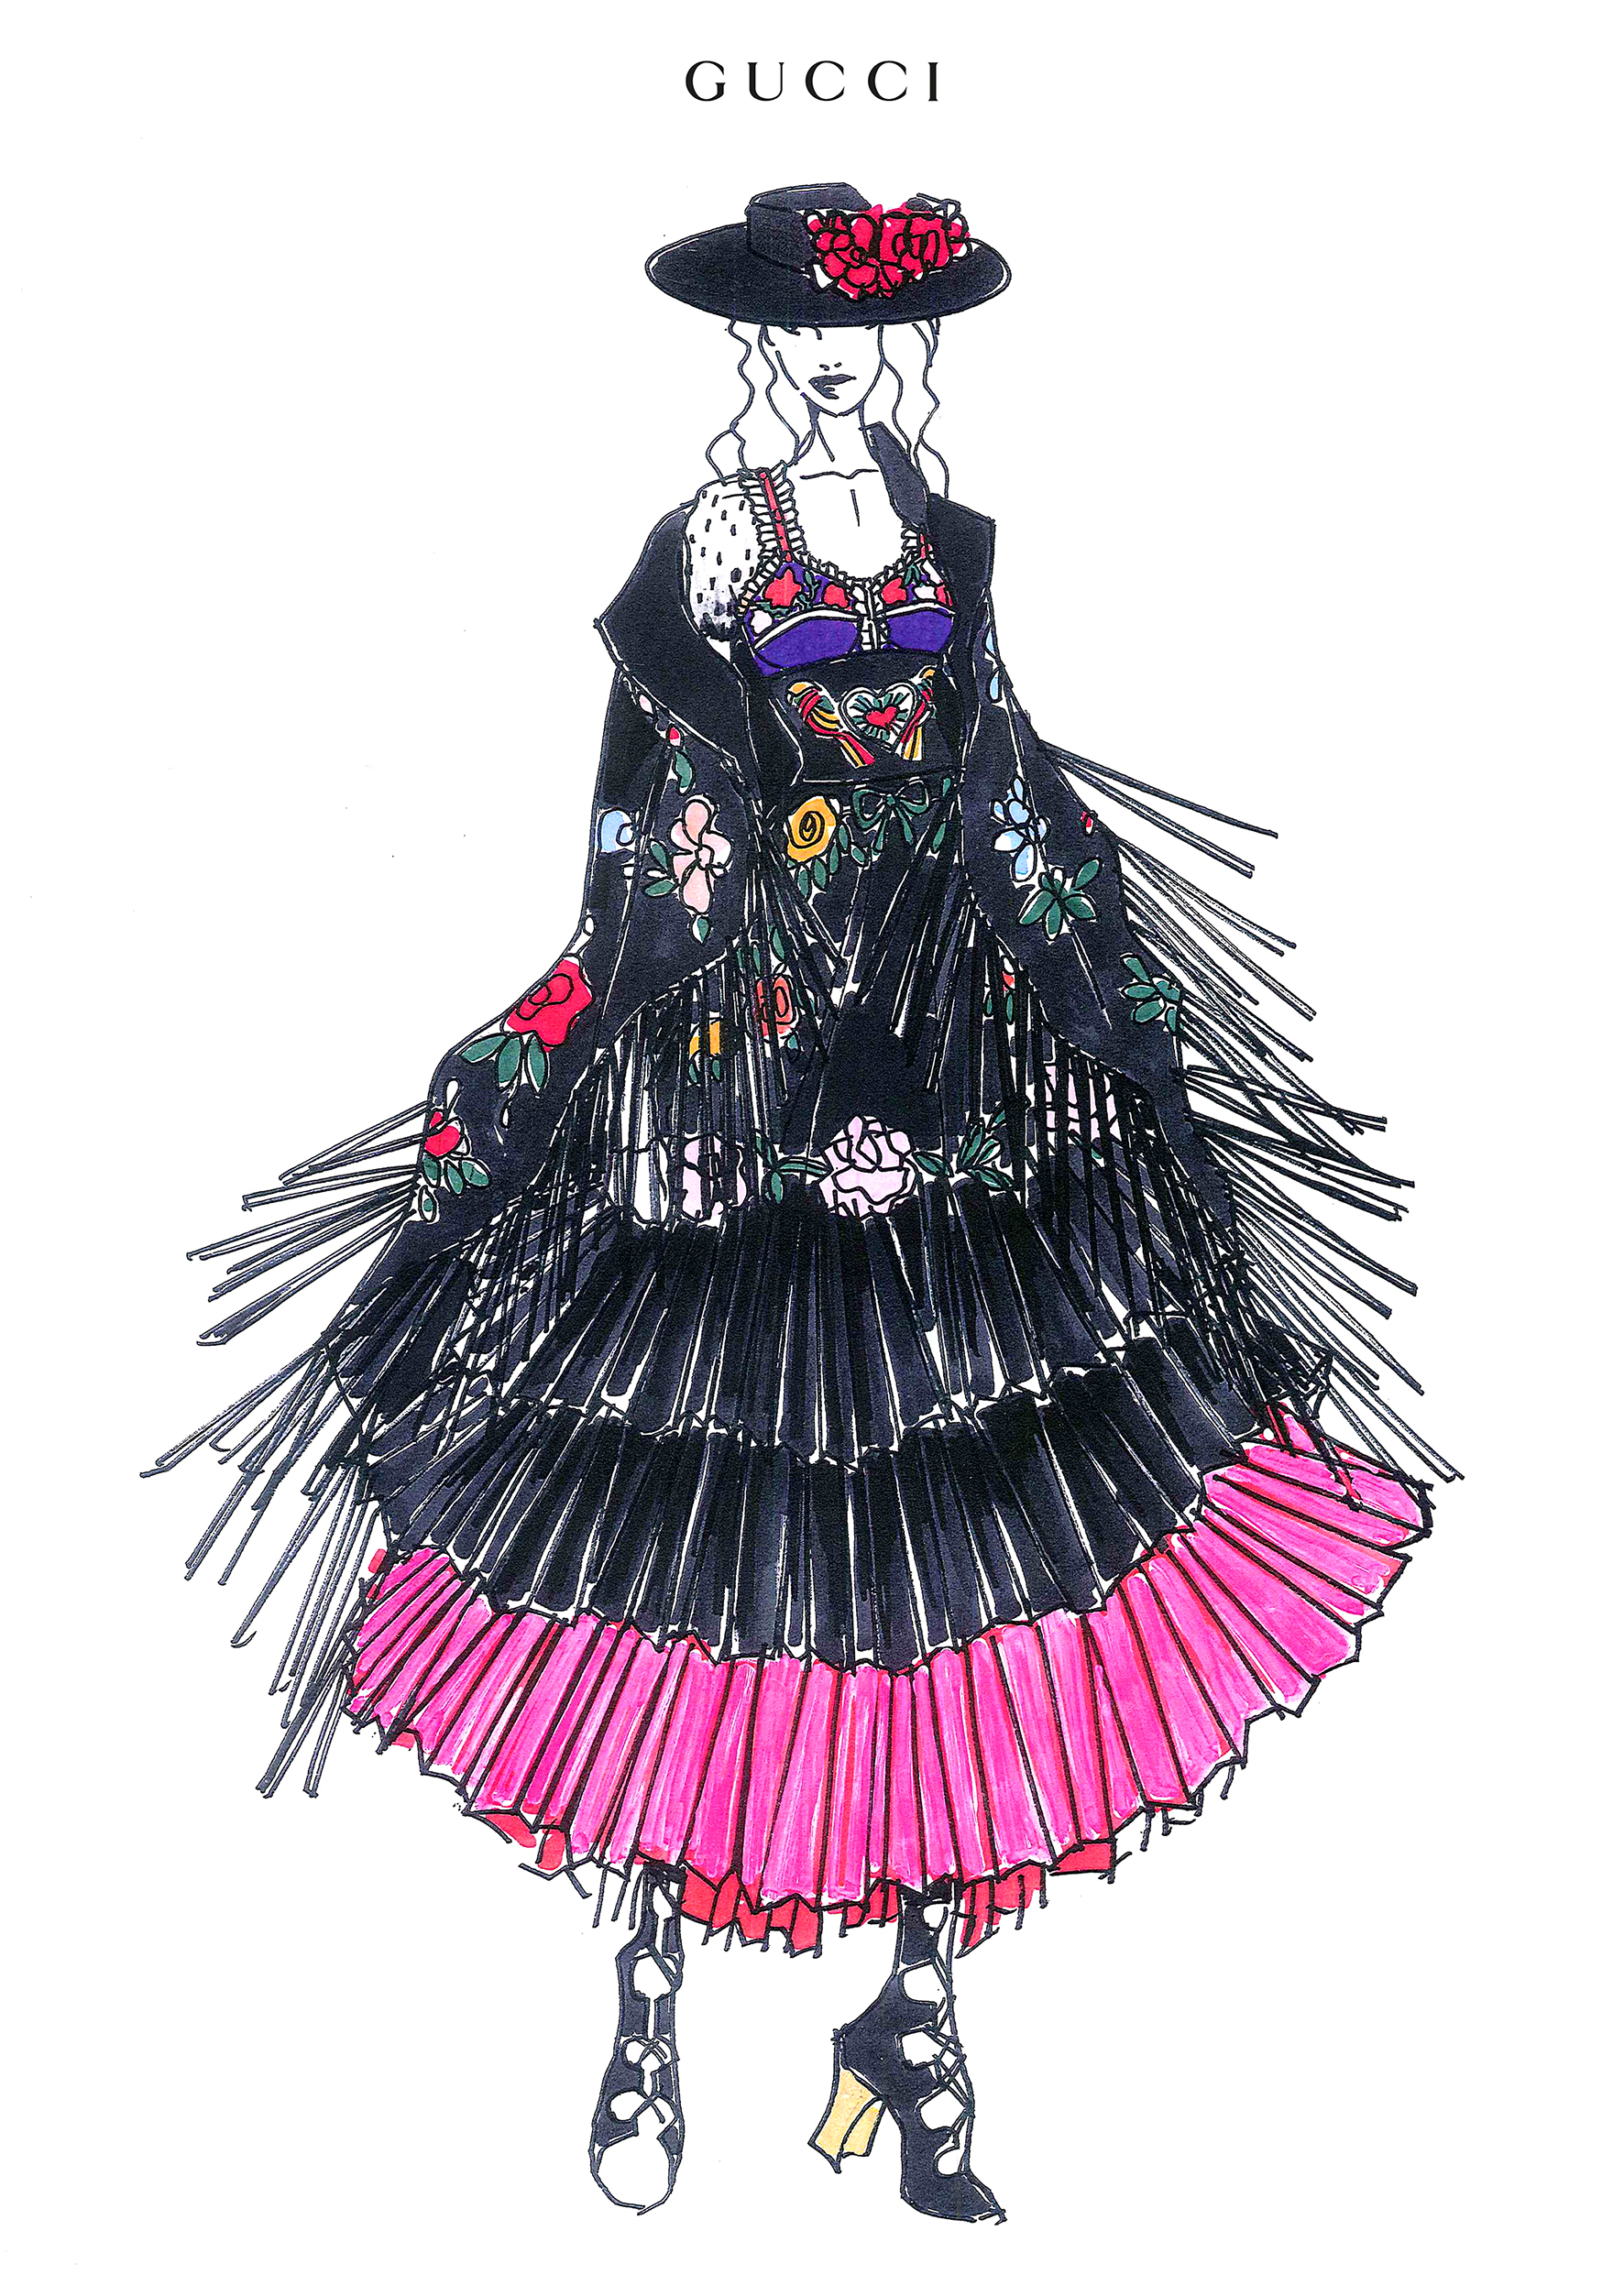 ALESSANDRO MICHELE’S COSTUMES FOR MADONNA’S REBEL HEART TOUR